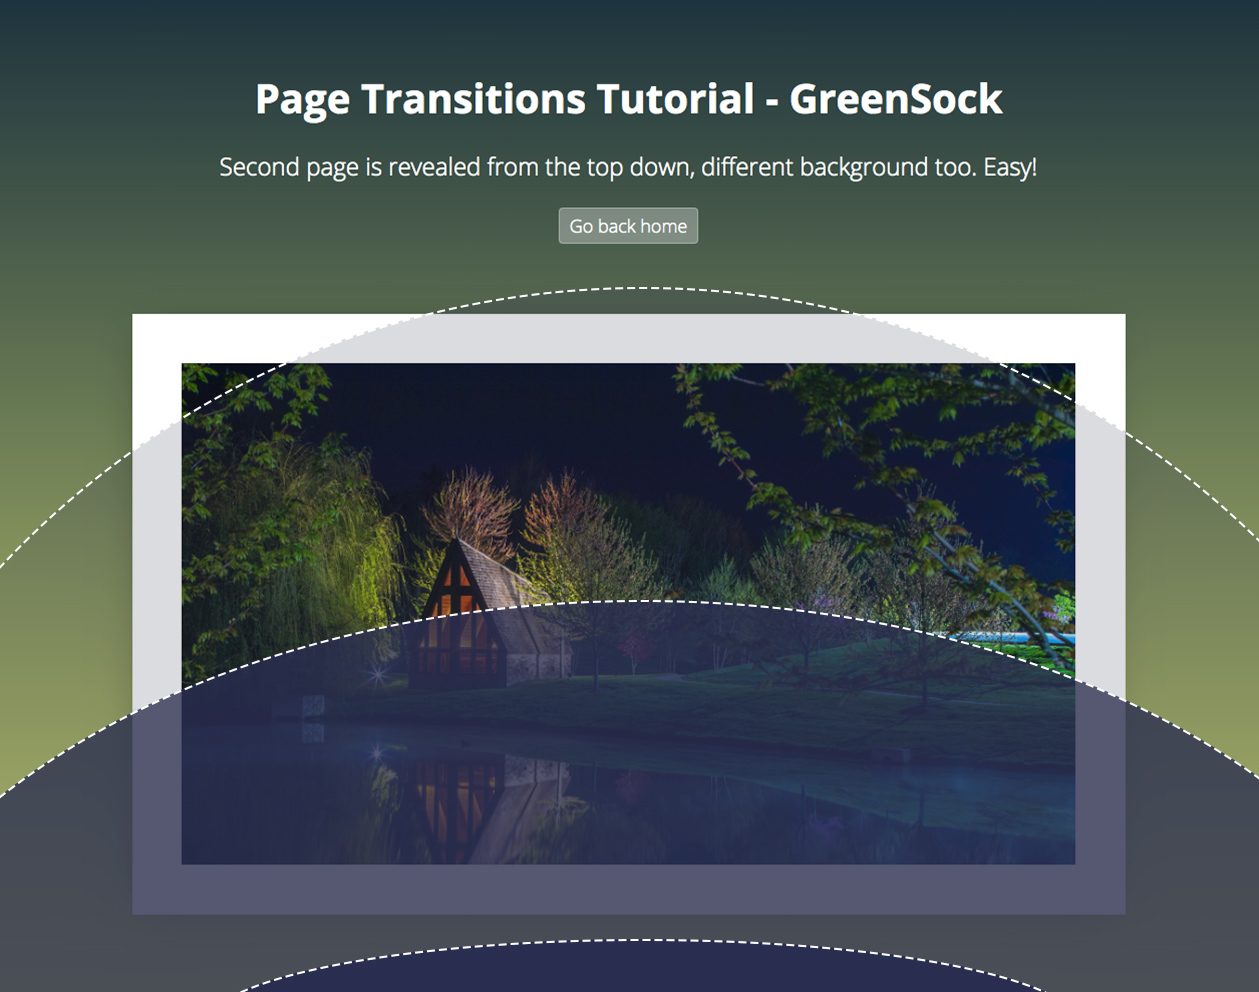 Page transitions tutorial